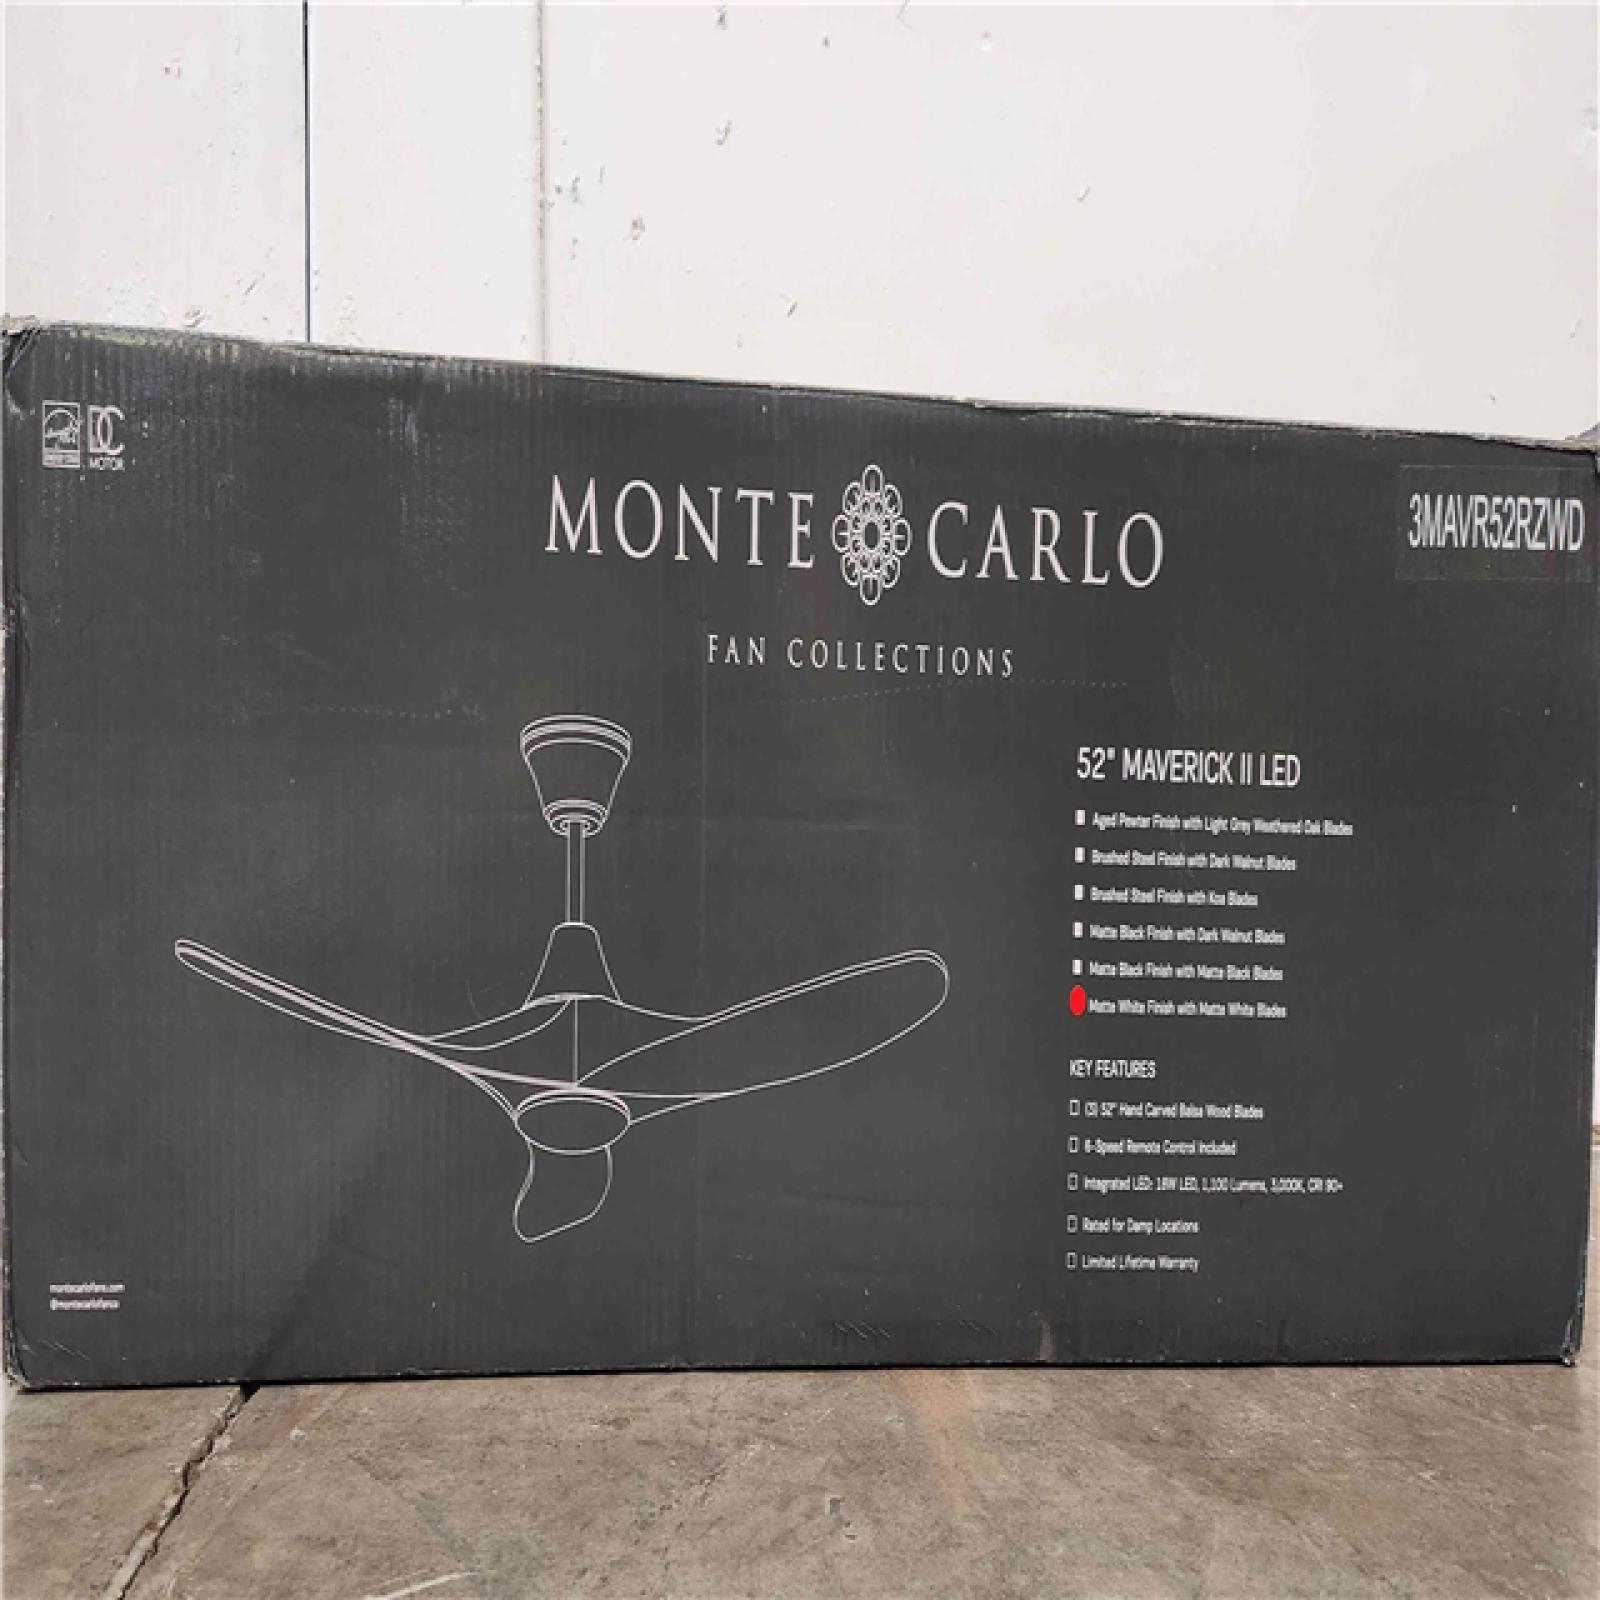 Phoenix Location NEW Monte Carlo 3MAVR52RZWD Maverick II Energy Star 52 Ceiling Fan with LED Light and Hand Remote Control, 3 Balsa Wood Blades, Matte White $806 Retail